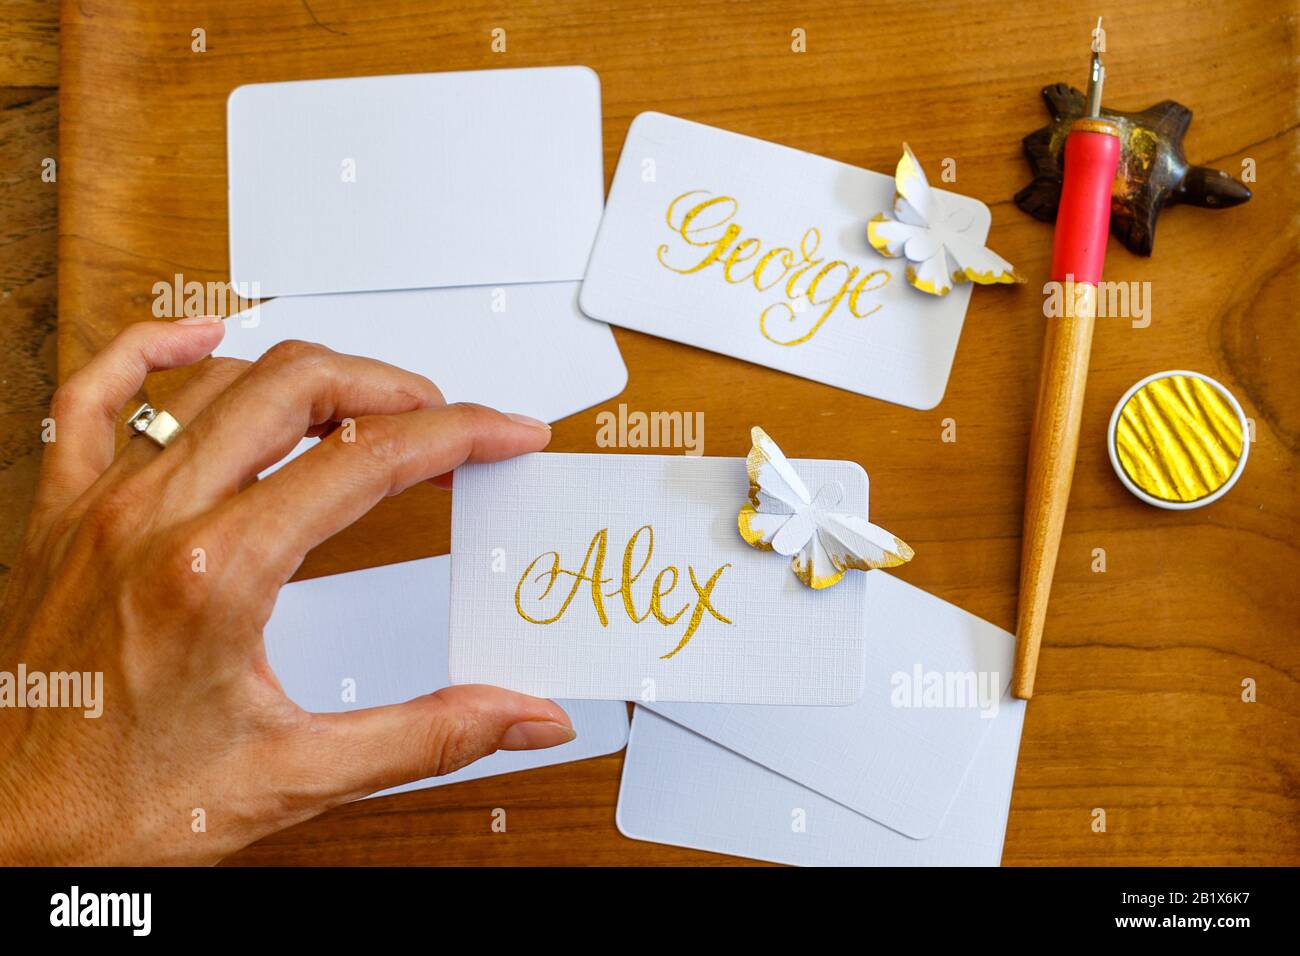 Wedding calligraphy - female hand holding handwritten place cards with names and paper butterflies. Golden writing on white paper. Stock Photo